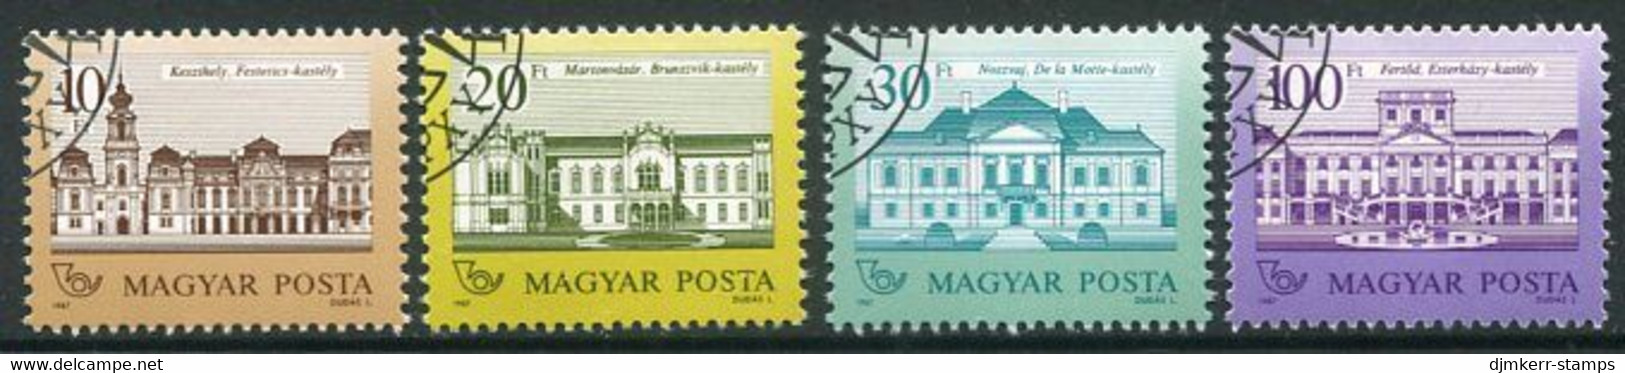 HUNGARY 1987 Definitive 10, 20, 30, 100 Ft. Used.  Michel 3901-04 - Used Stamps